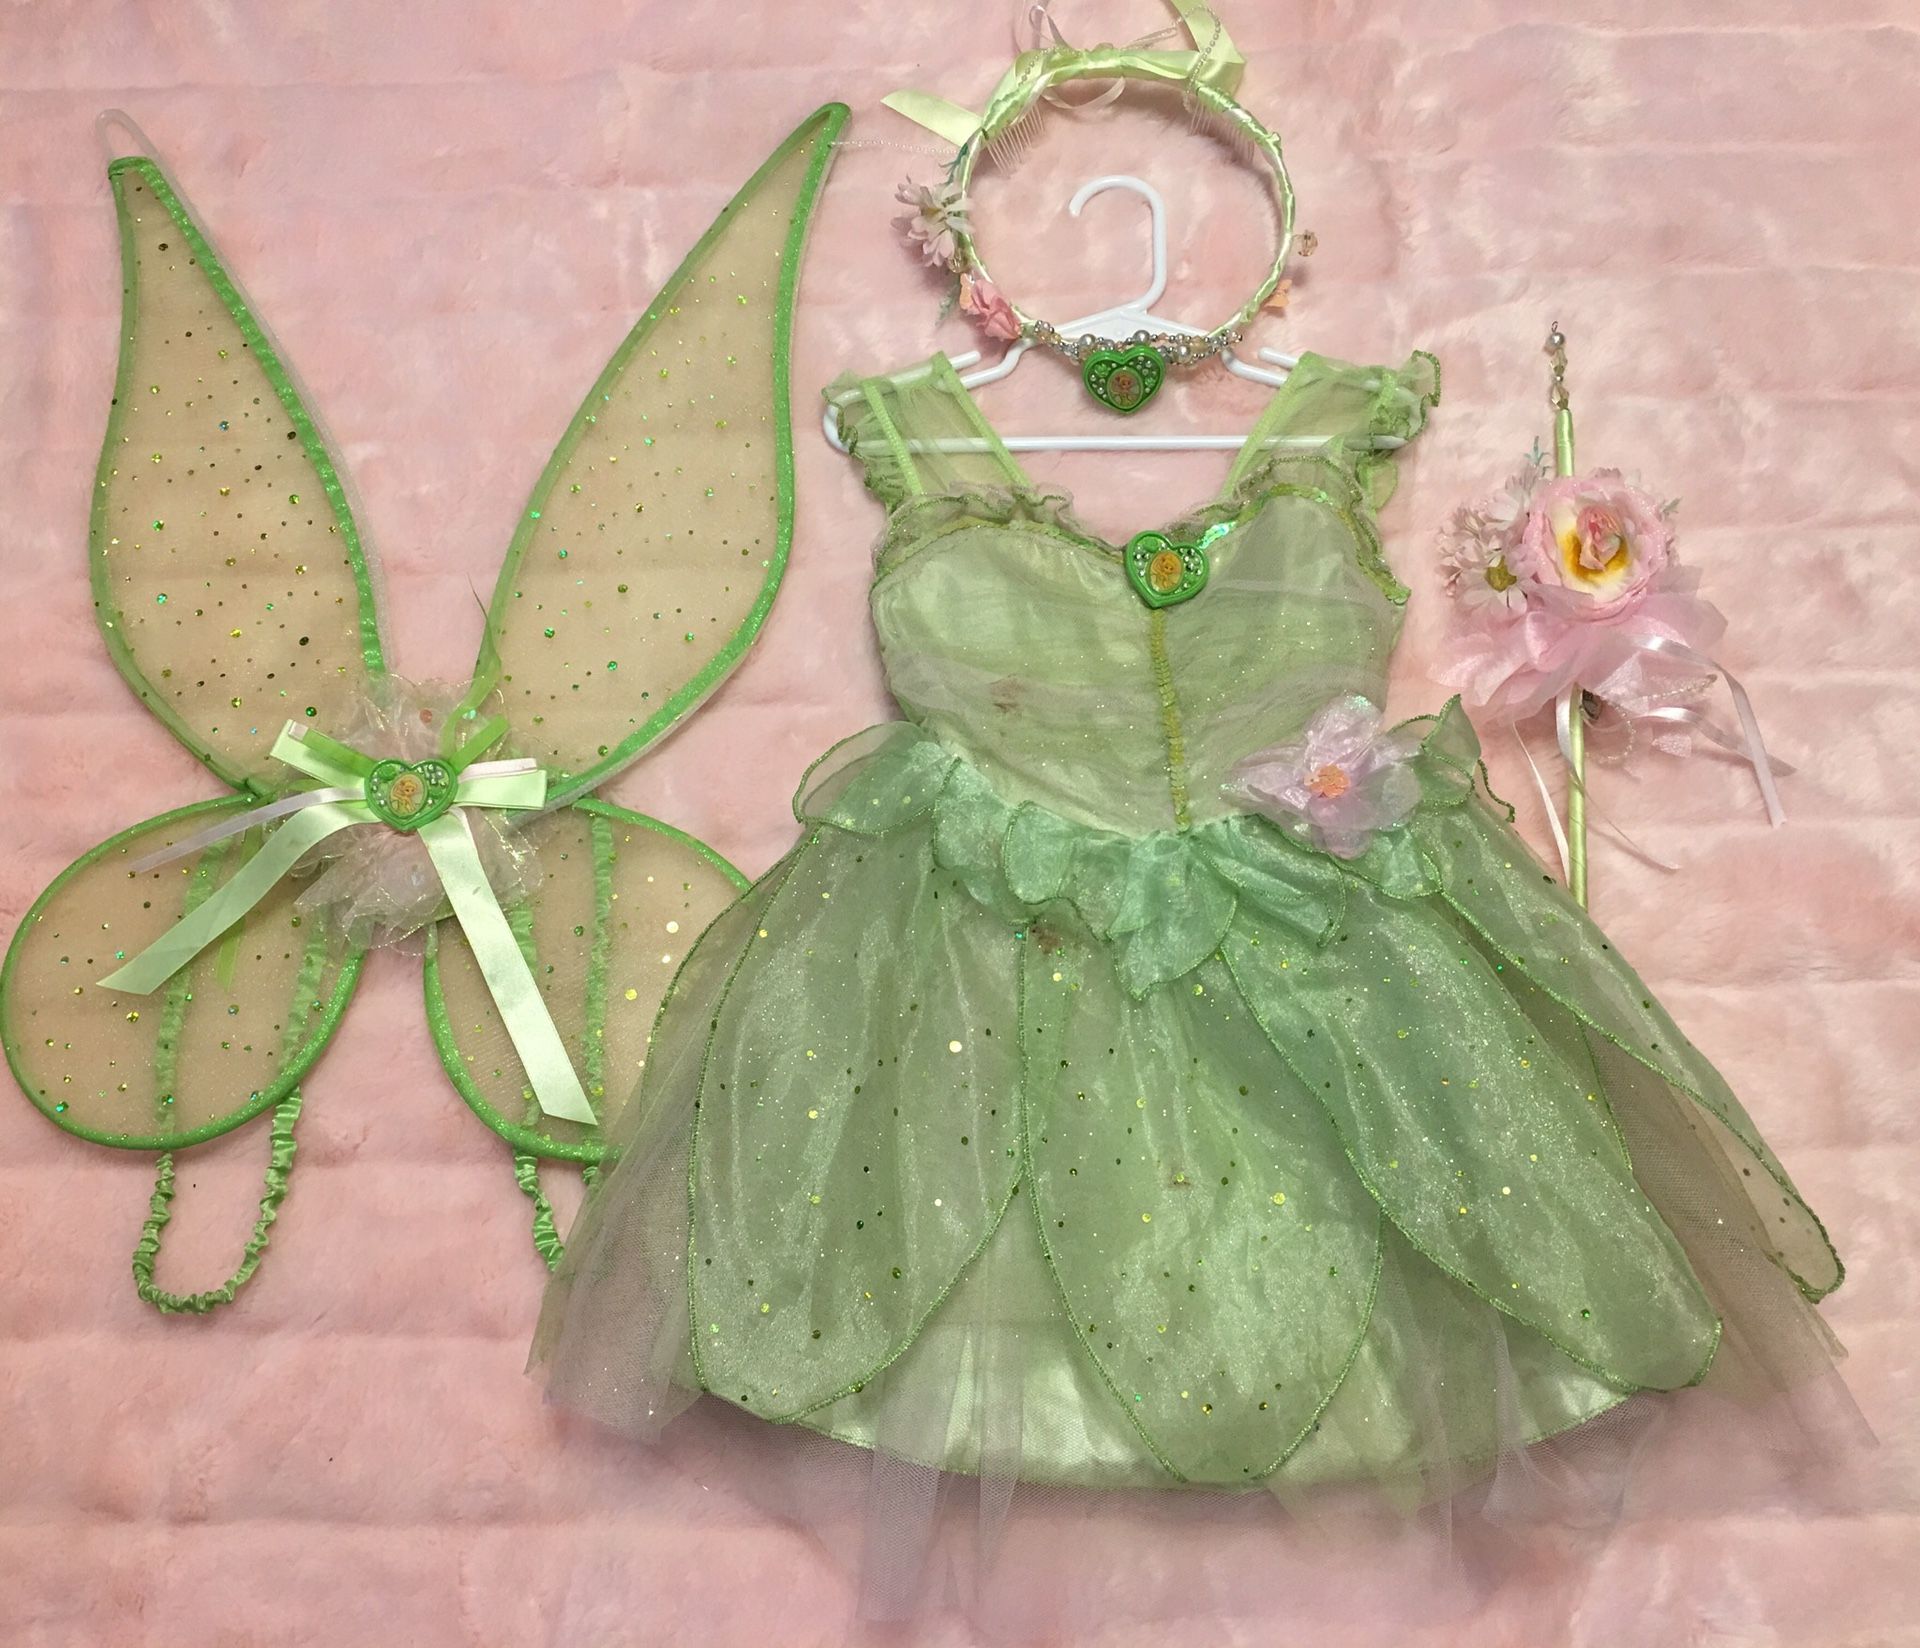 Disney Tinkerbell Costume, wings, headpiece and wand. Size XS (4)